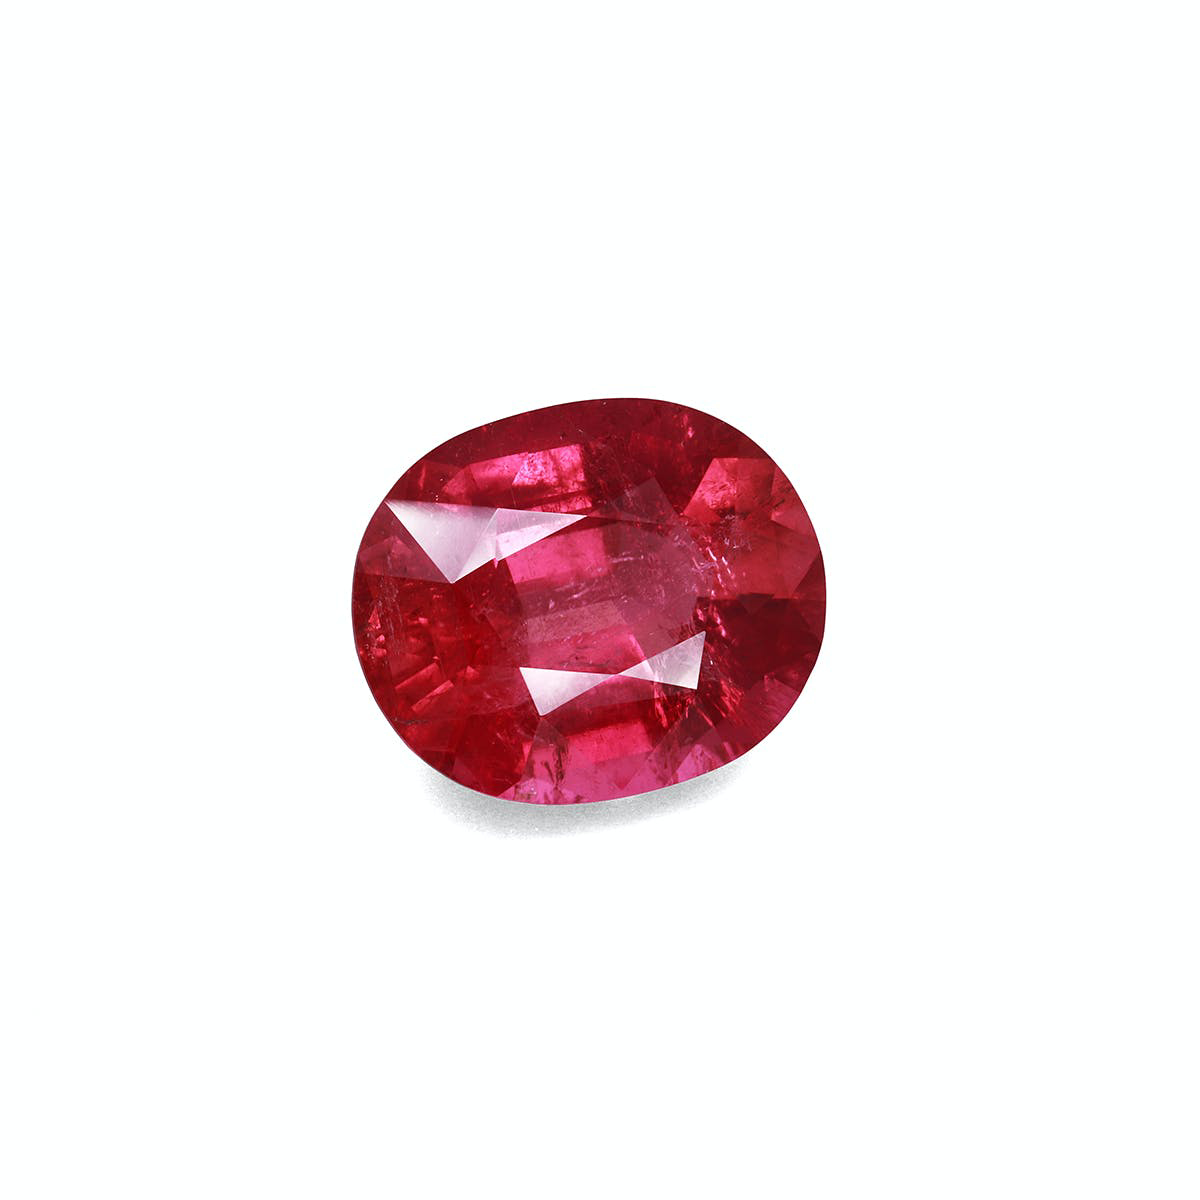 Picture of Rose Red Rubellite Tourmaline 23.47ct (RL0190)